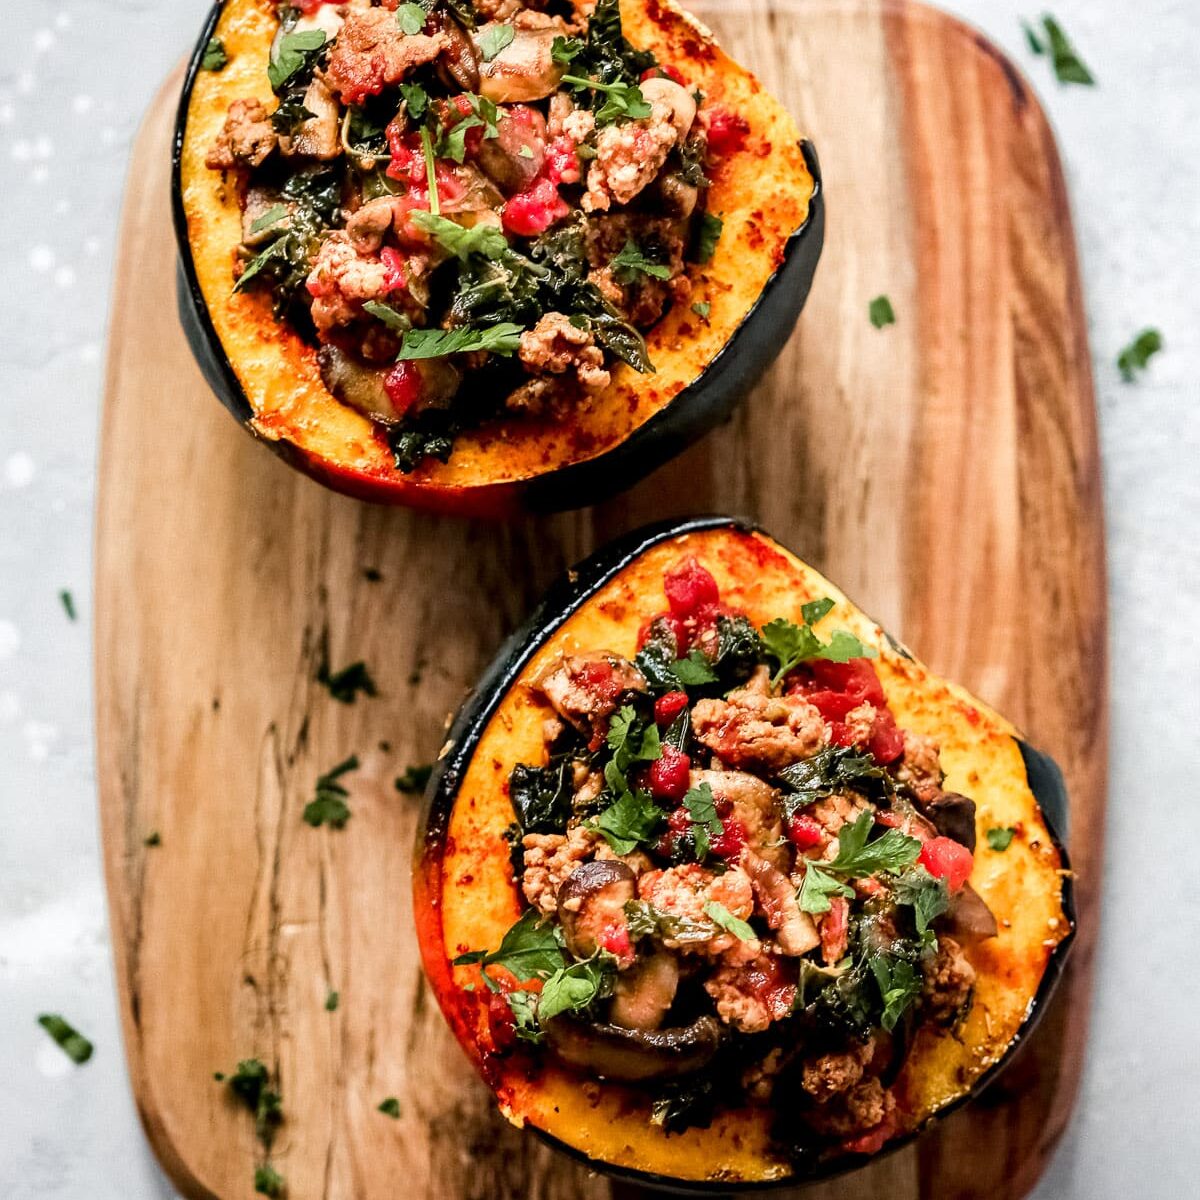 Sausage and kale stuffed acorn squash on a wooden cutting board. One of my favorite date night dinner ideas.